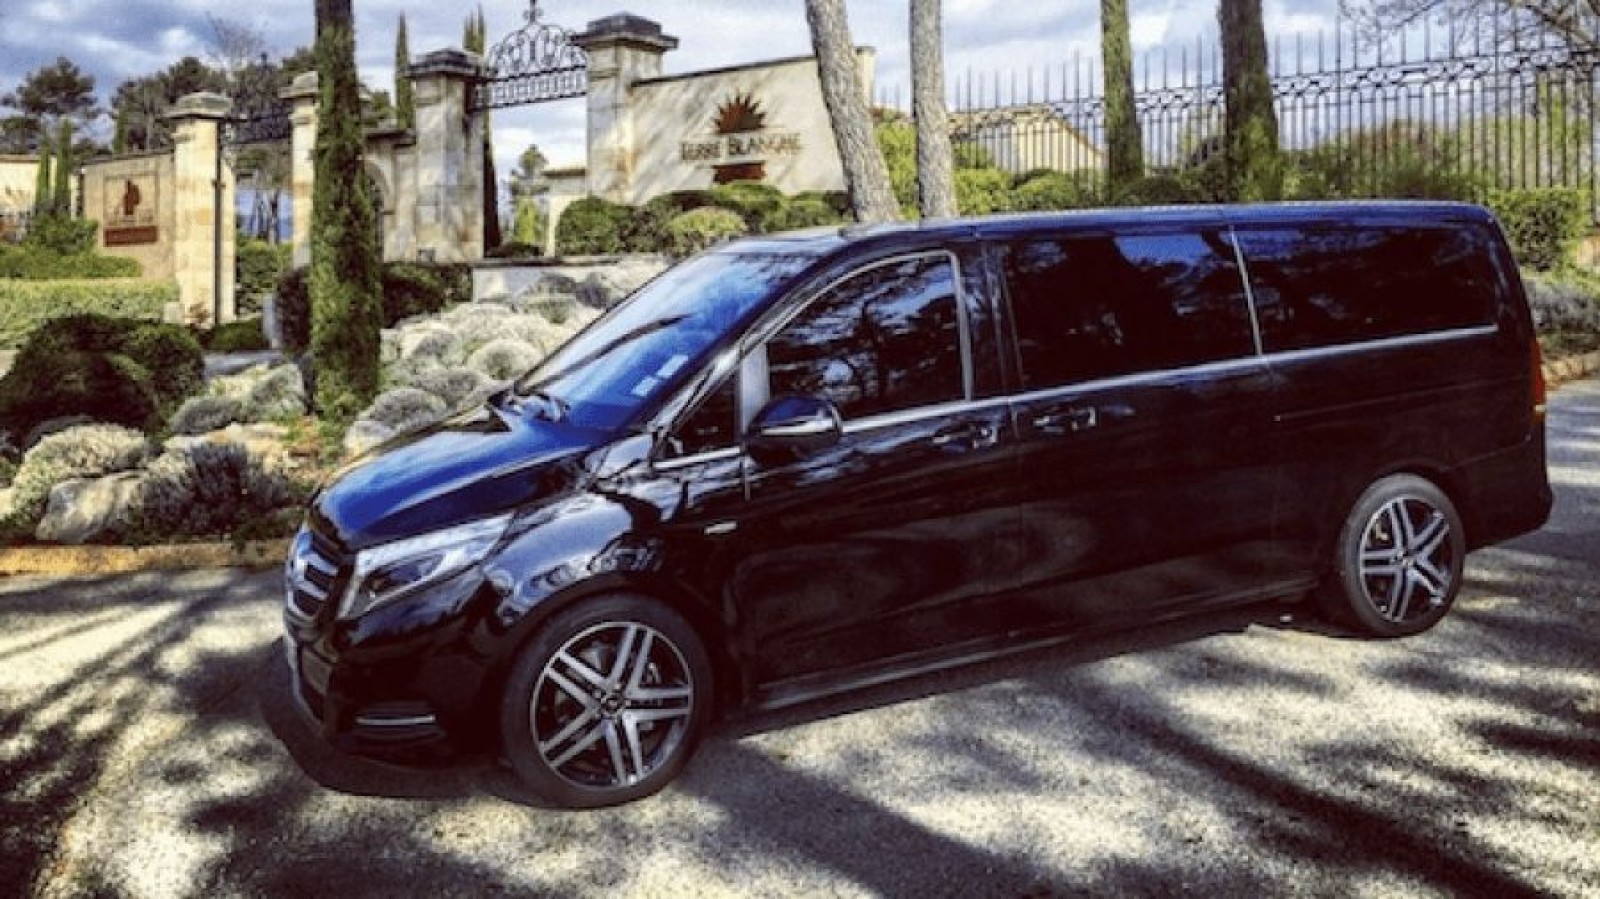 Private Chauffeur in Nice for Weddings - Premium Vehicles & Services - Reactivity 24/7 - Ruby Services - Car Rental with Chauffeur in Nice